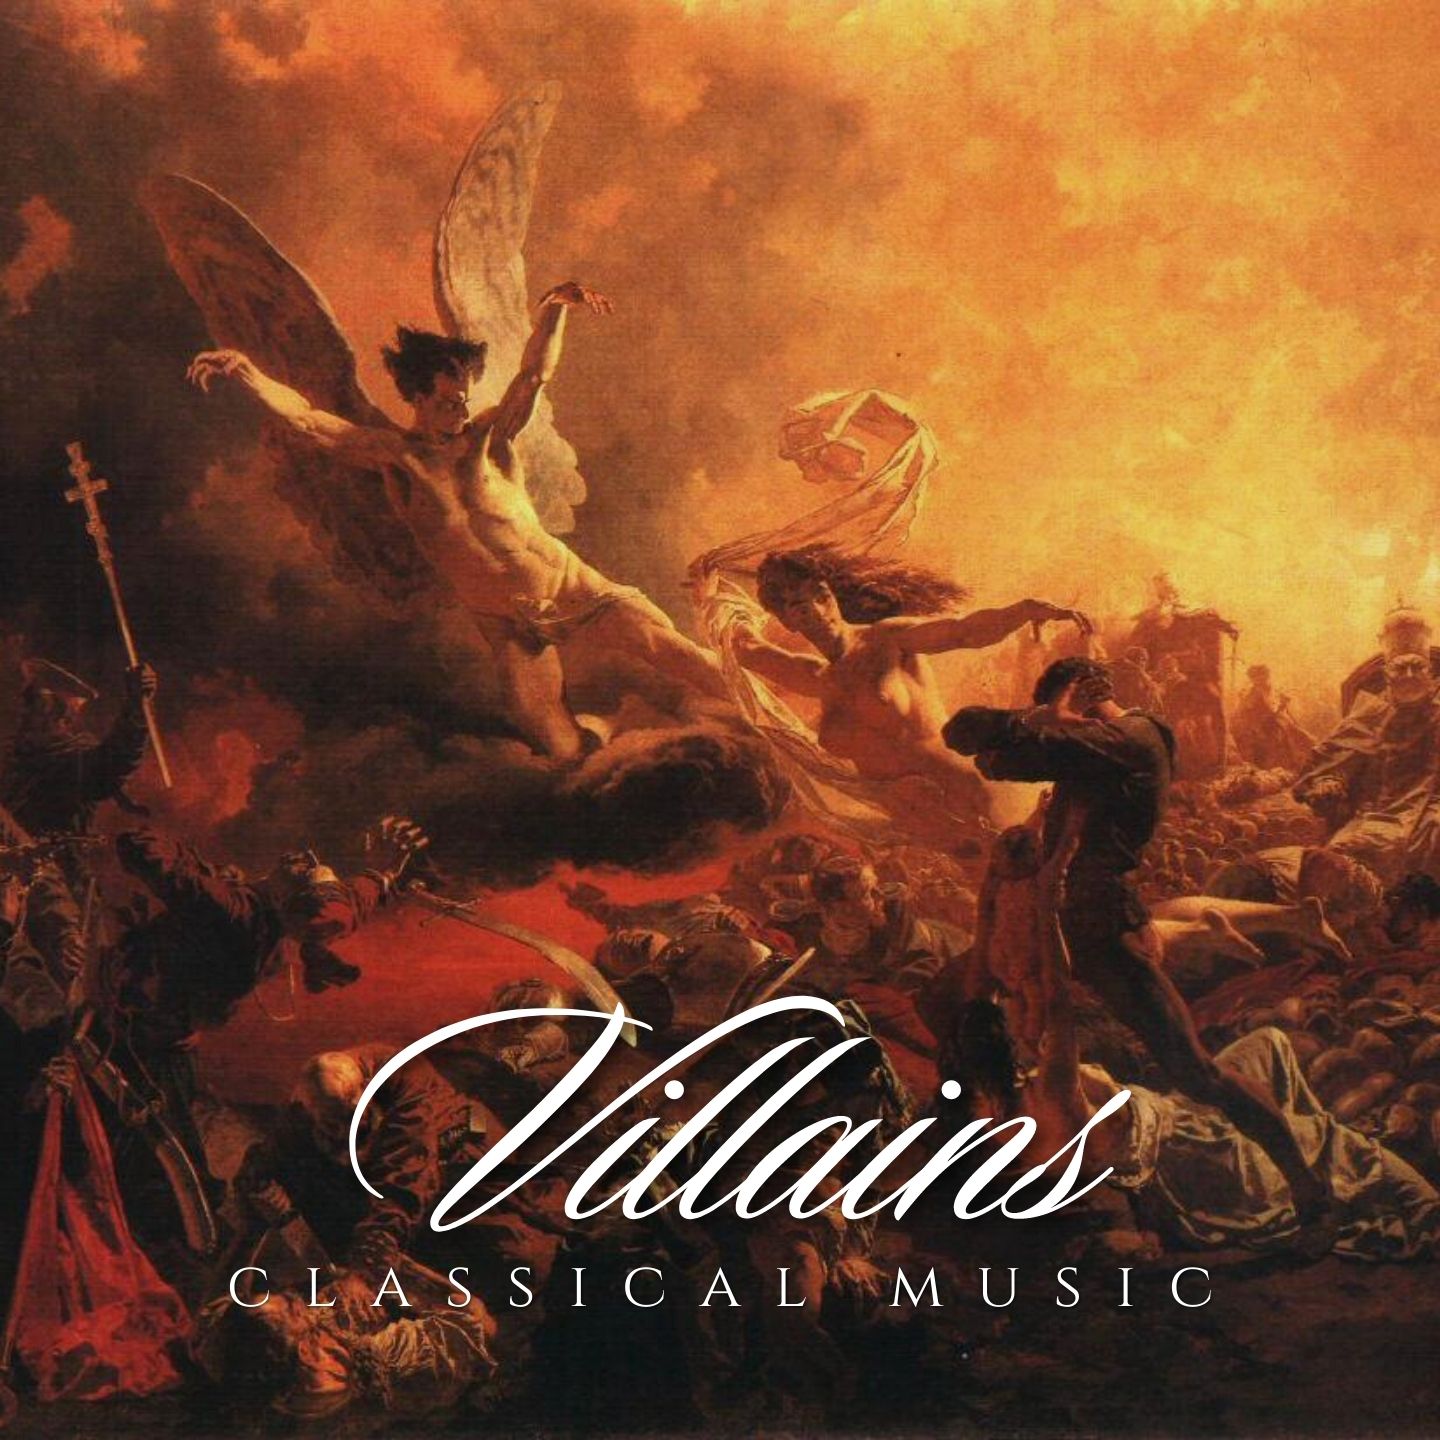 Classical Music for Villains